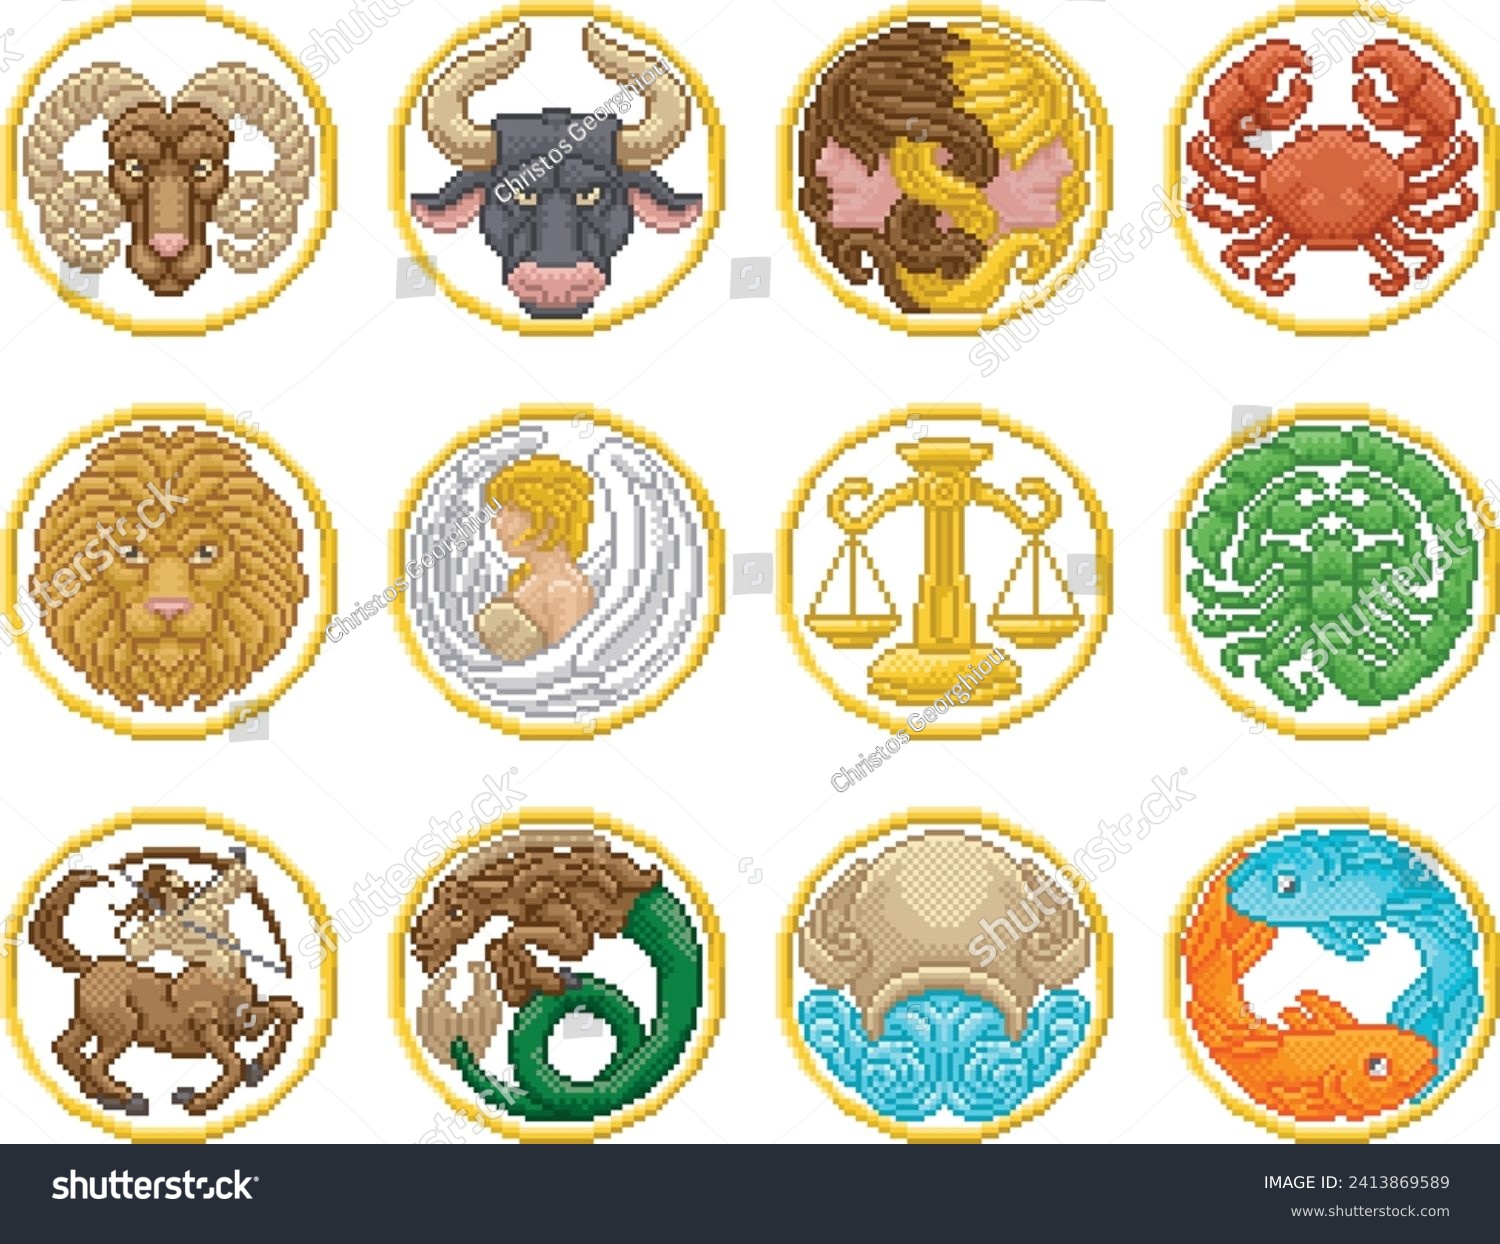 SVG of Zodiac horoscope or astrology signs in a retro video game arcade 8 bit pixel art style svg